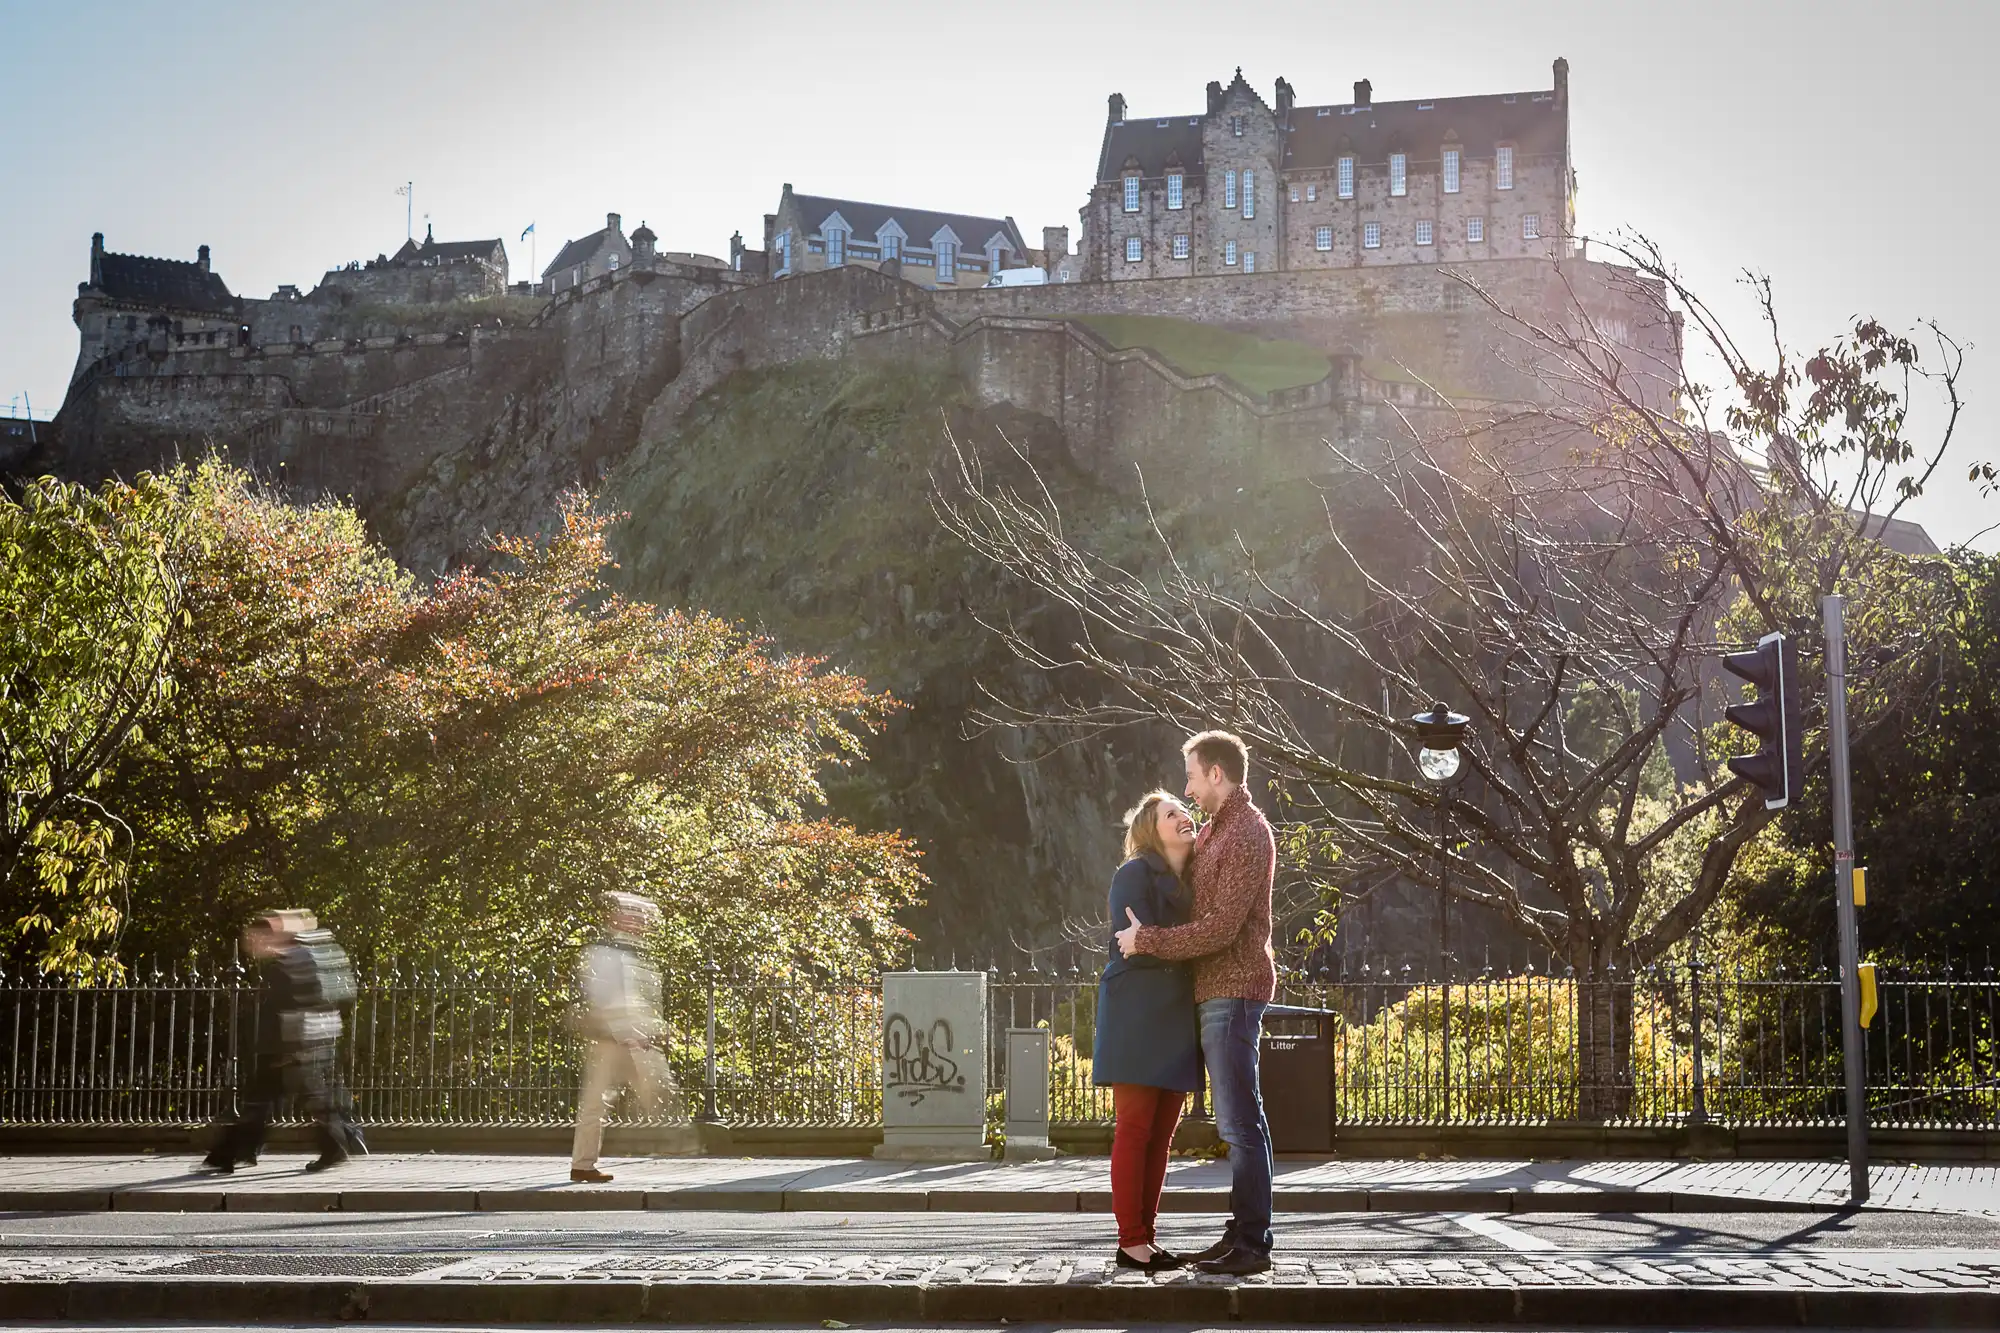 A couple embraces in the foreground with edinburgh castle perched atop a rocky hill in the background on a sunny day.